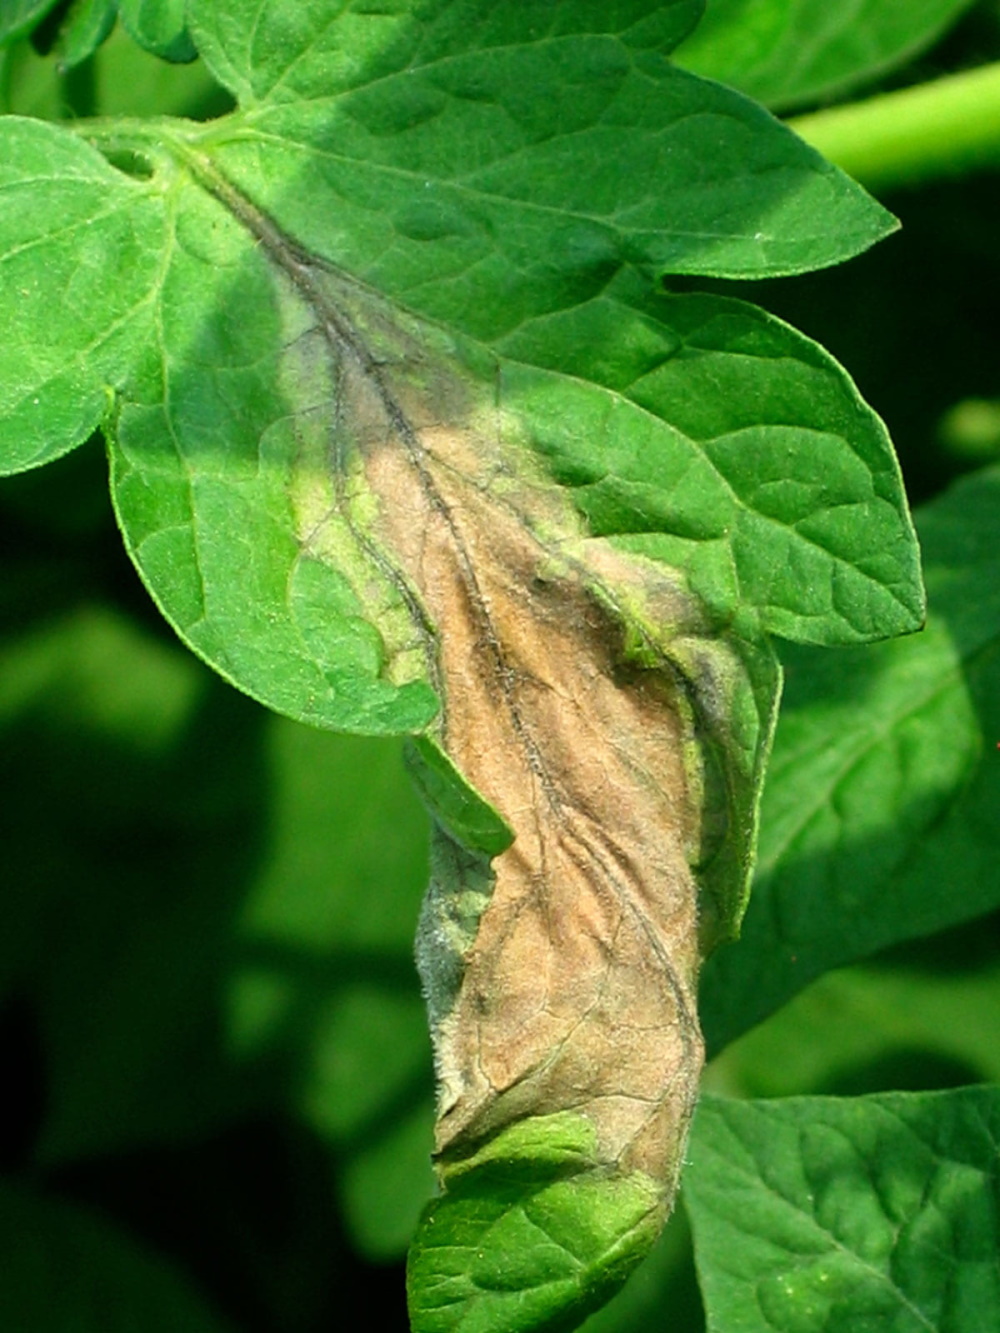 Late Blight Tomato Leaf | The Coeur d Alene Coop